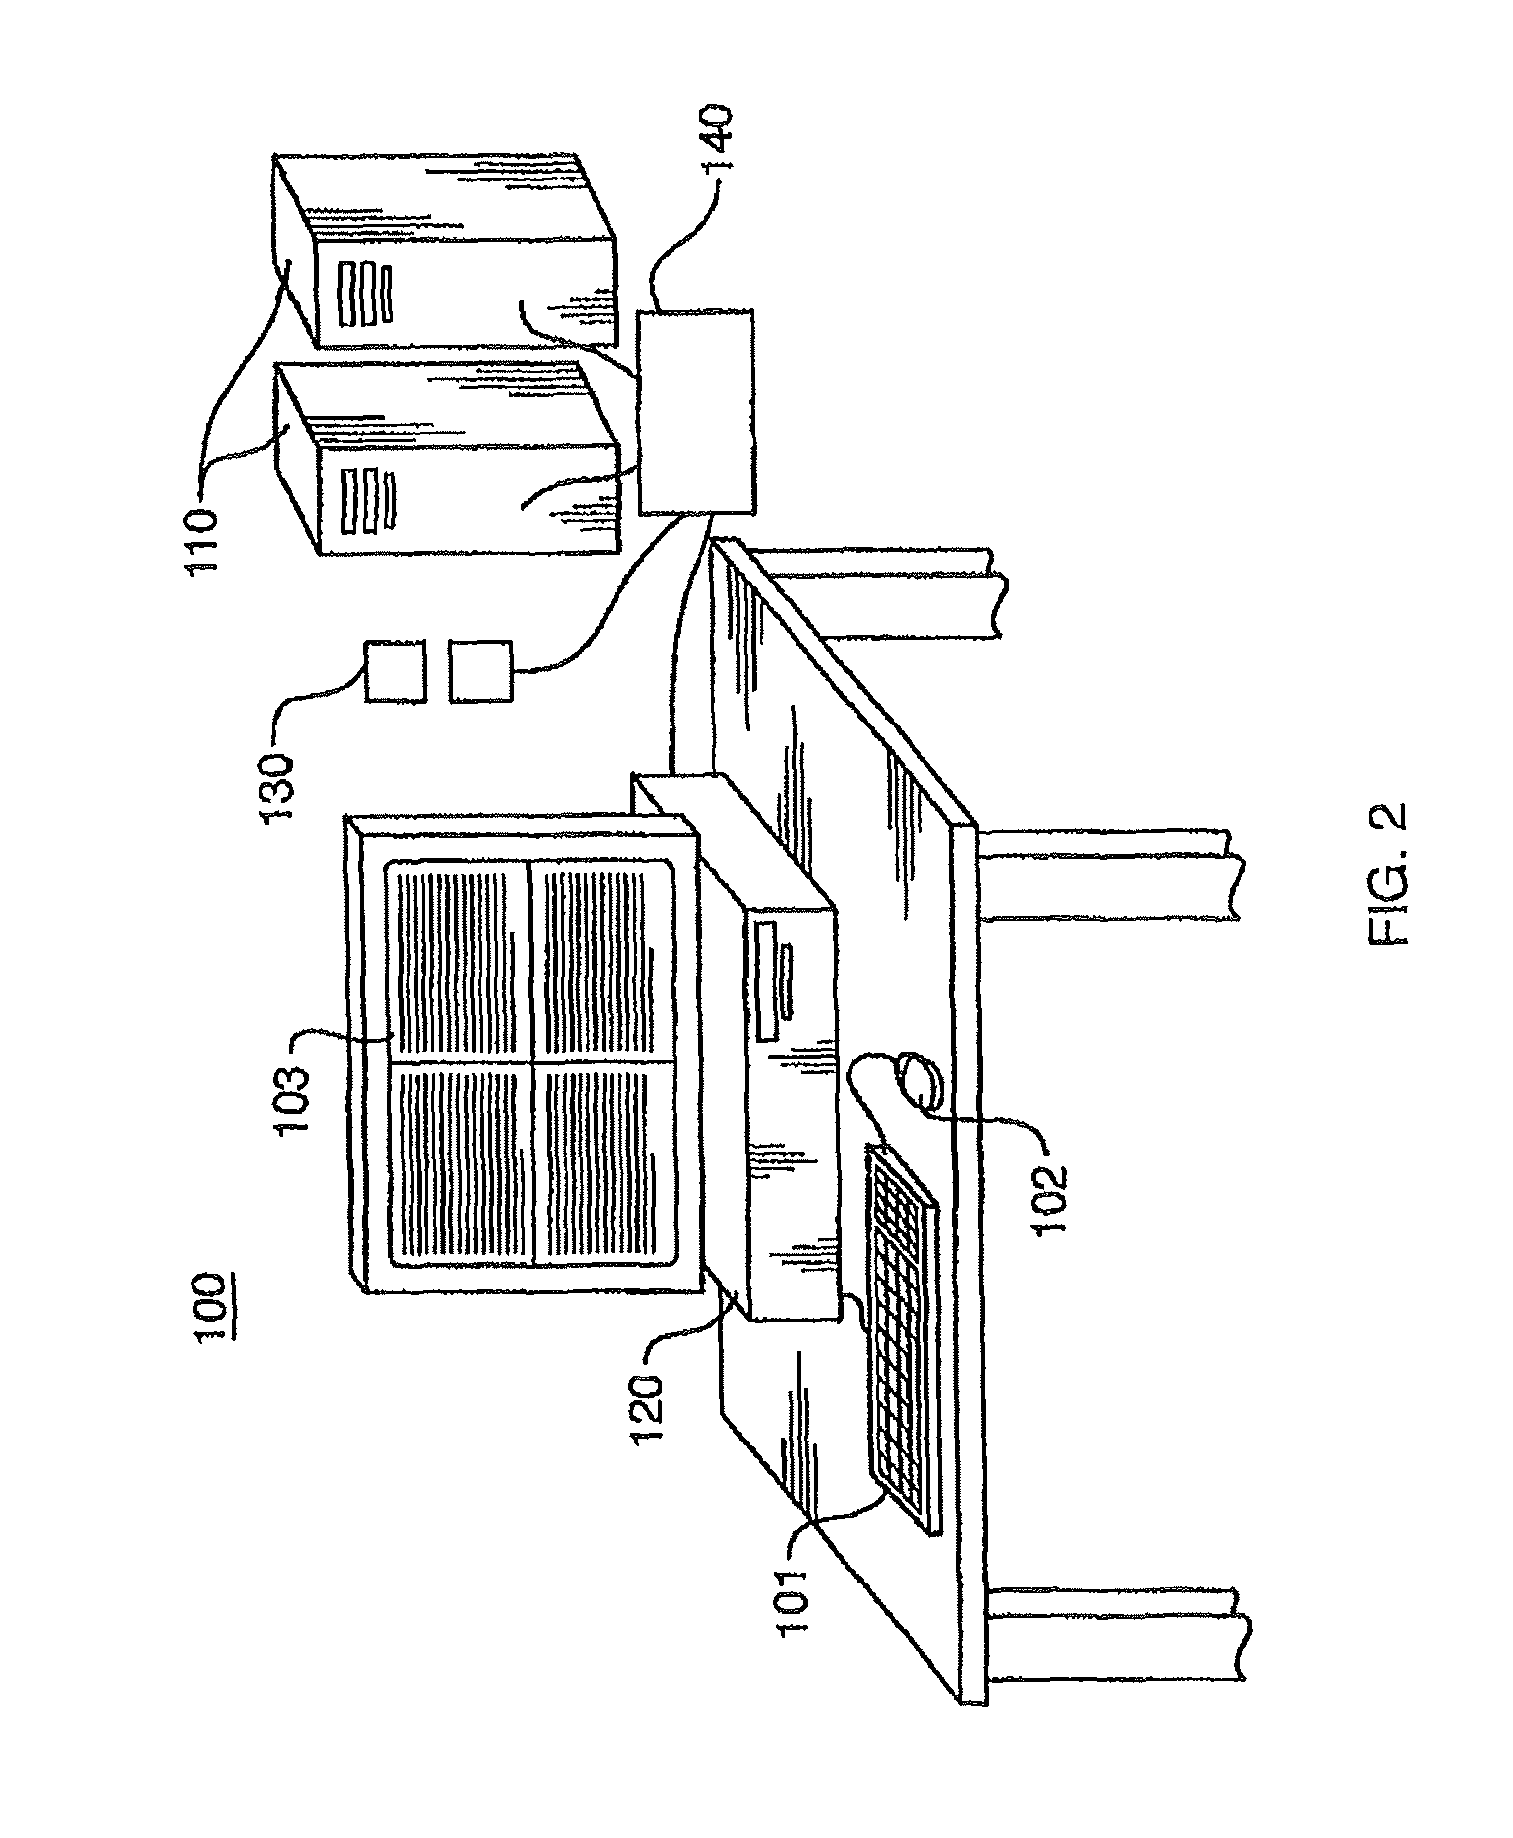 Rapid production turnkey system and related method